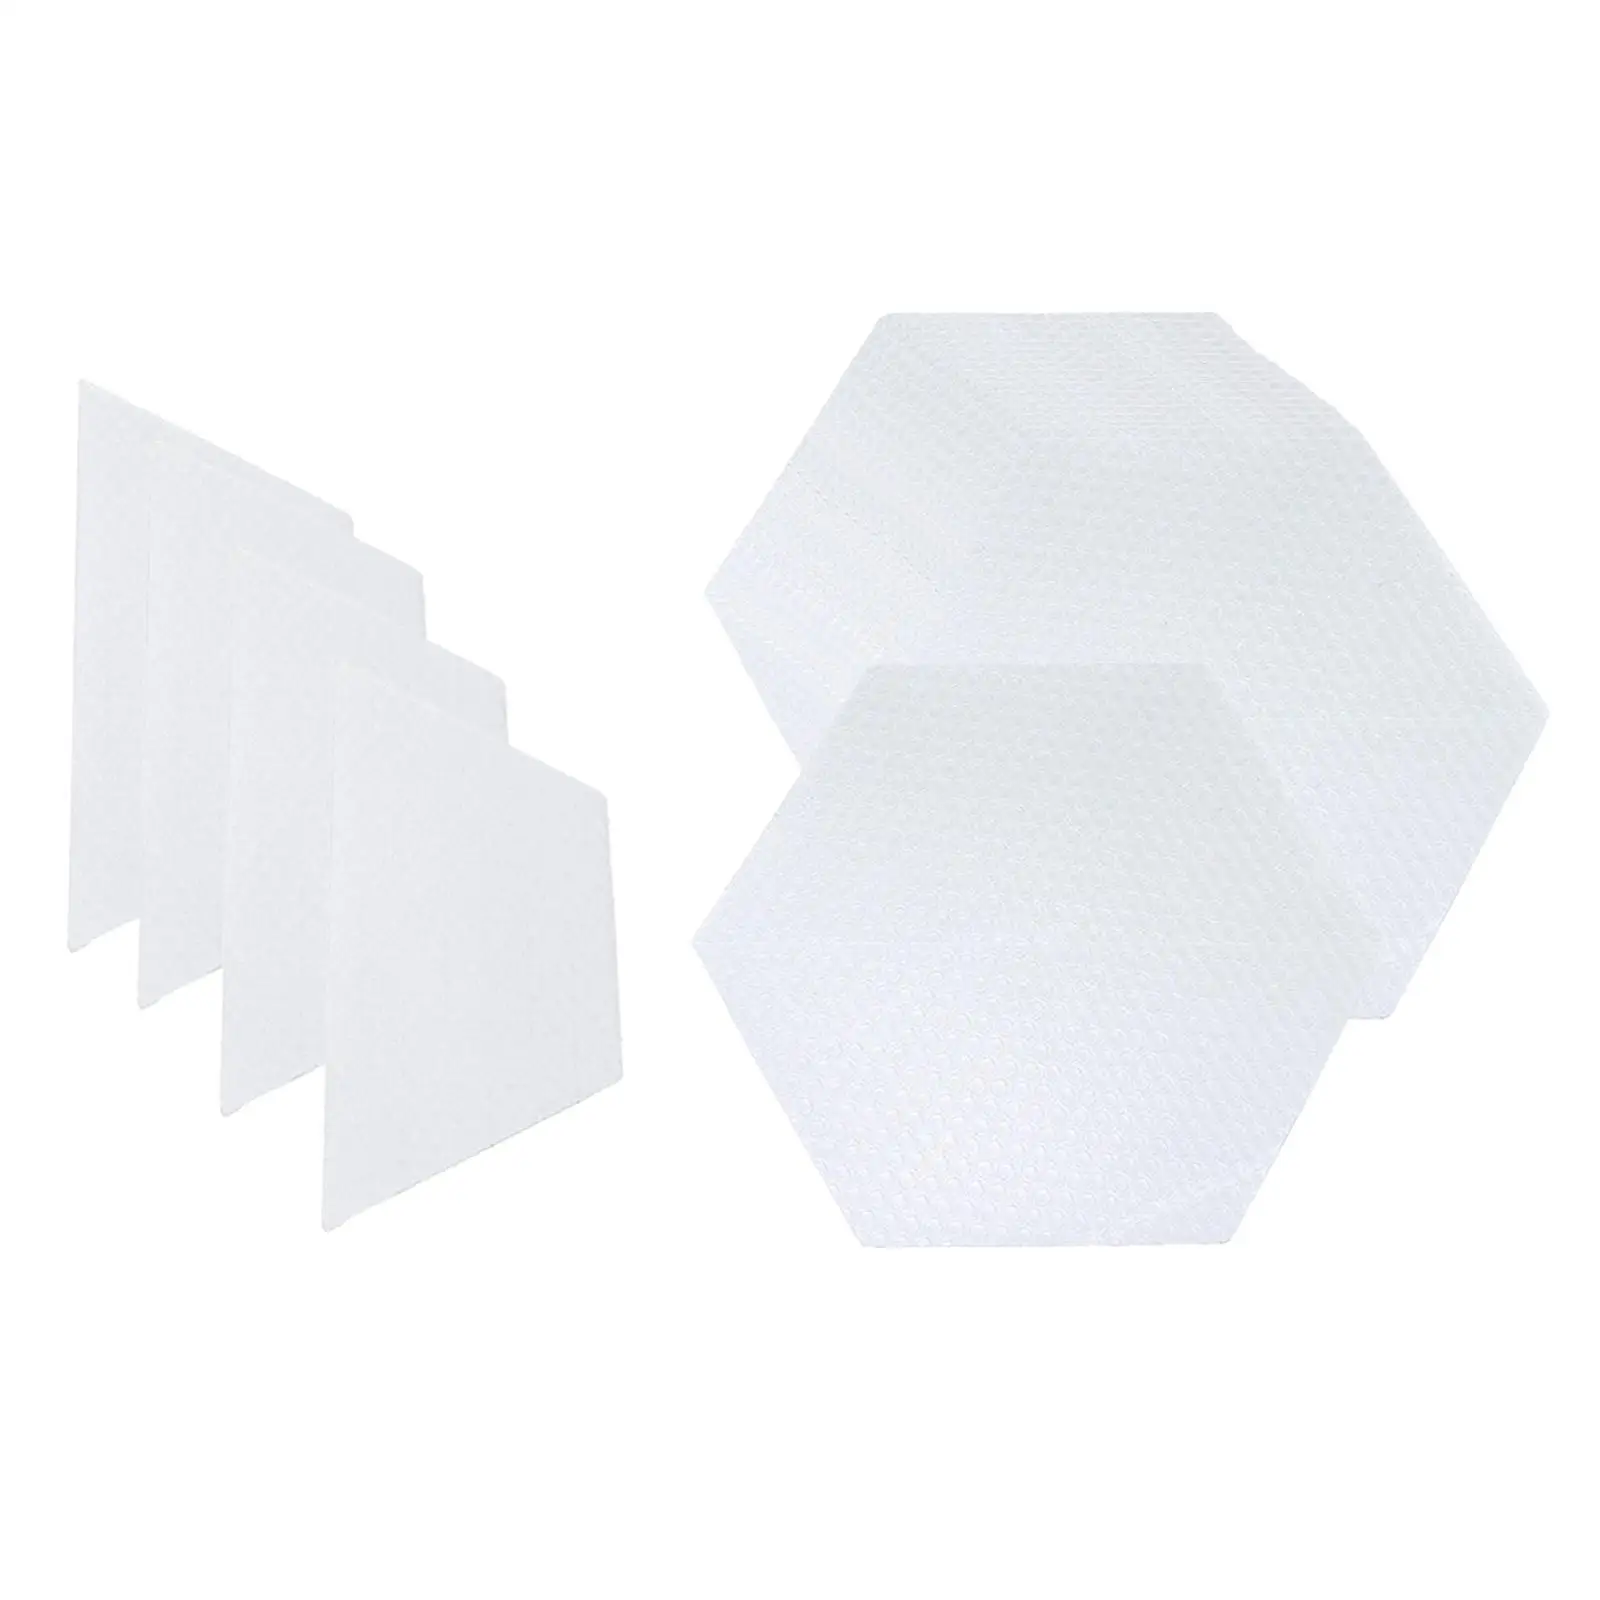 Adhesive Hexagon Surfboard Pads Waxless Surfing Accessory Surf Deck Pads